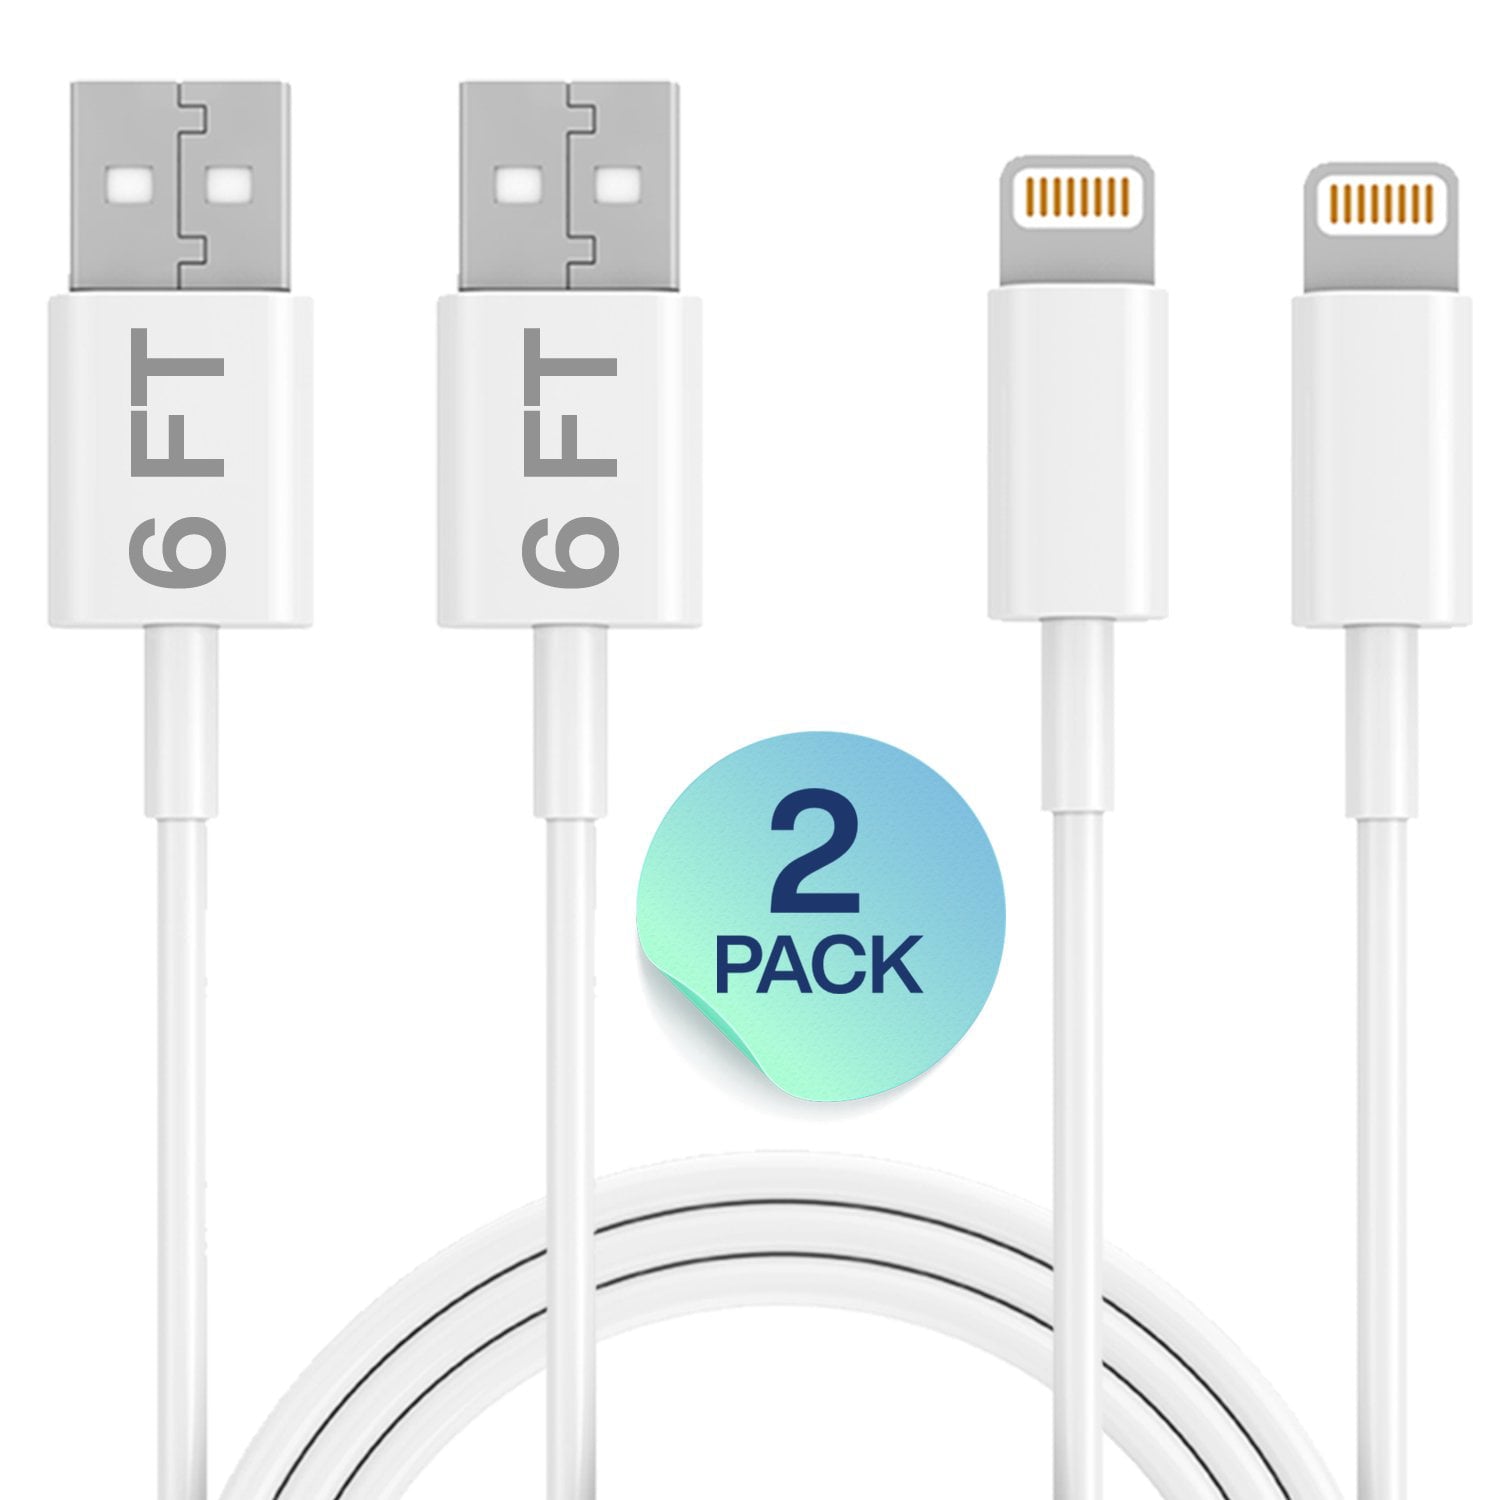 Junipel Universal Compatibility Aple Devices Charging, Data Transfer USB to Lightning Cable Set of 2, 6 Ft. (White)